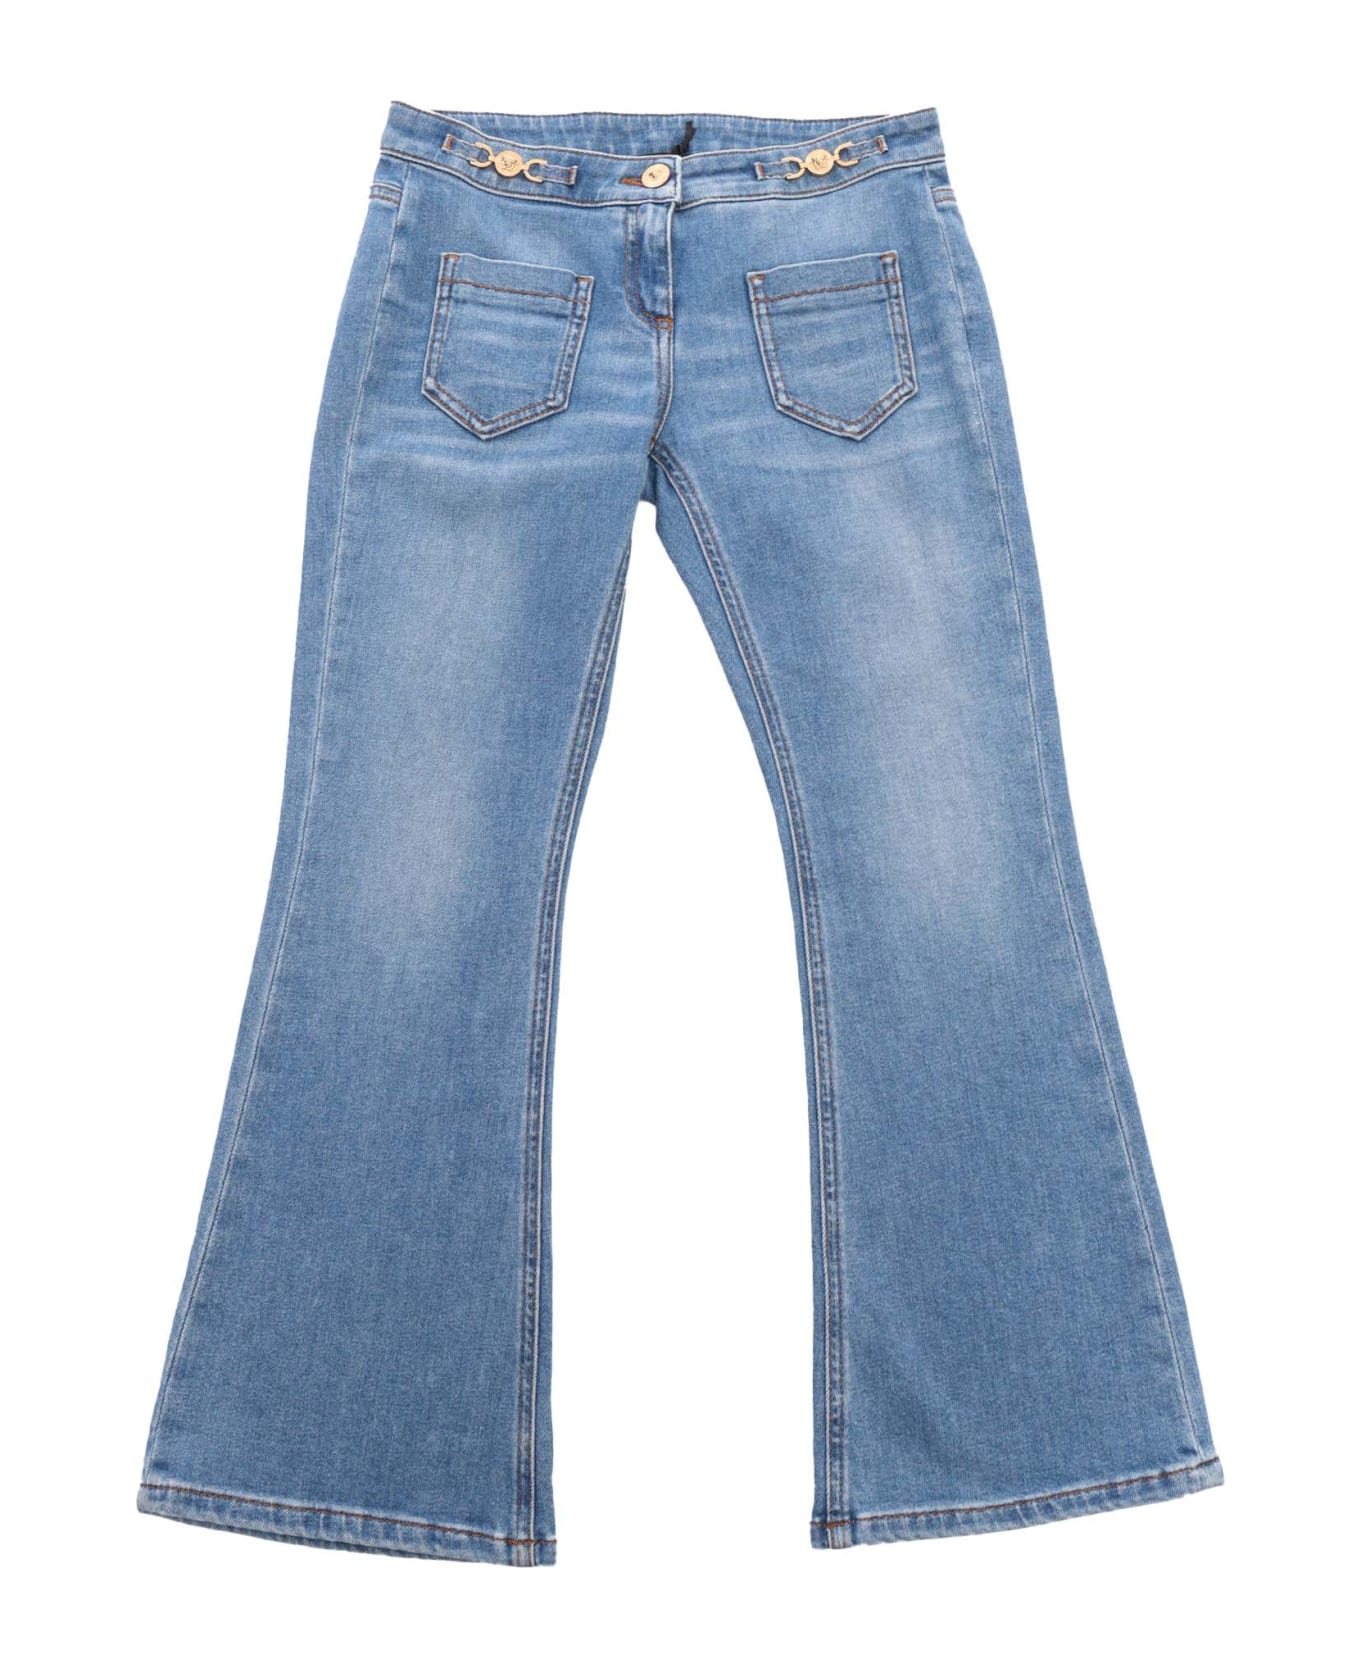 Versace Flared Jeans - LIGHT BLUE ボトムス